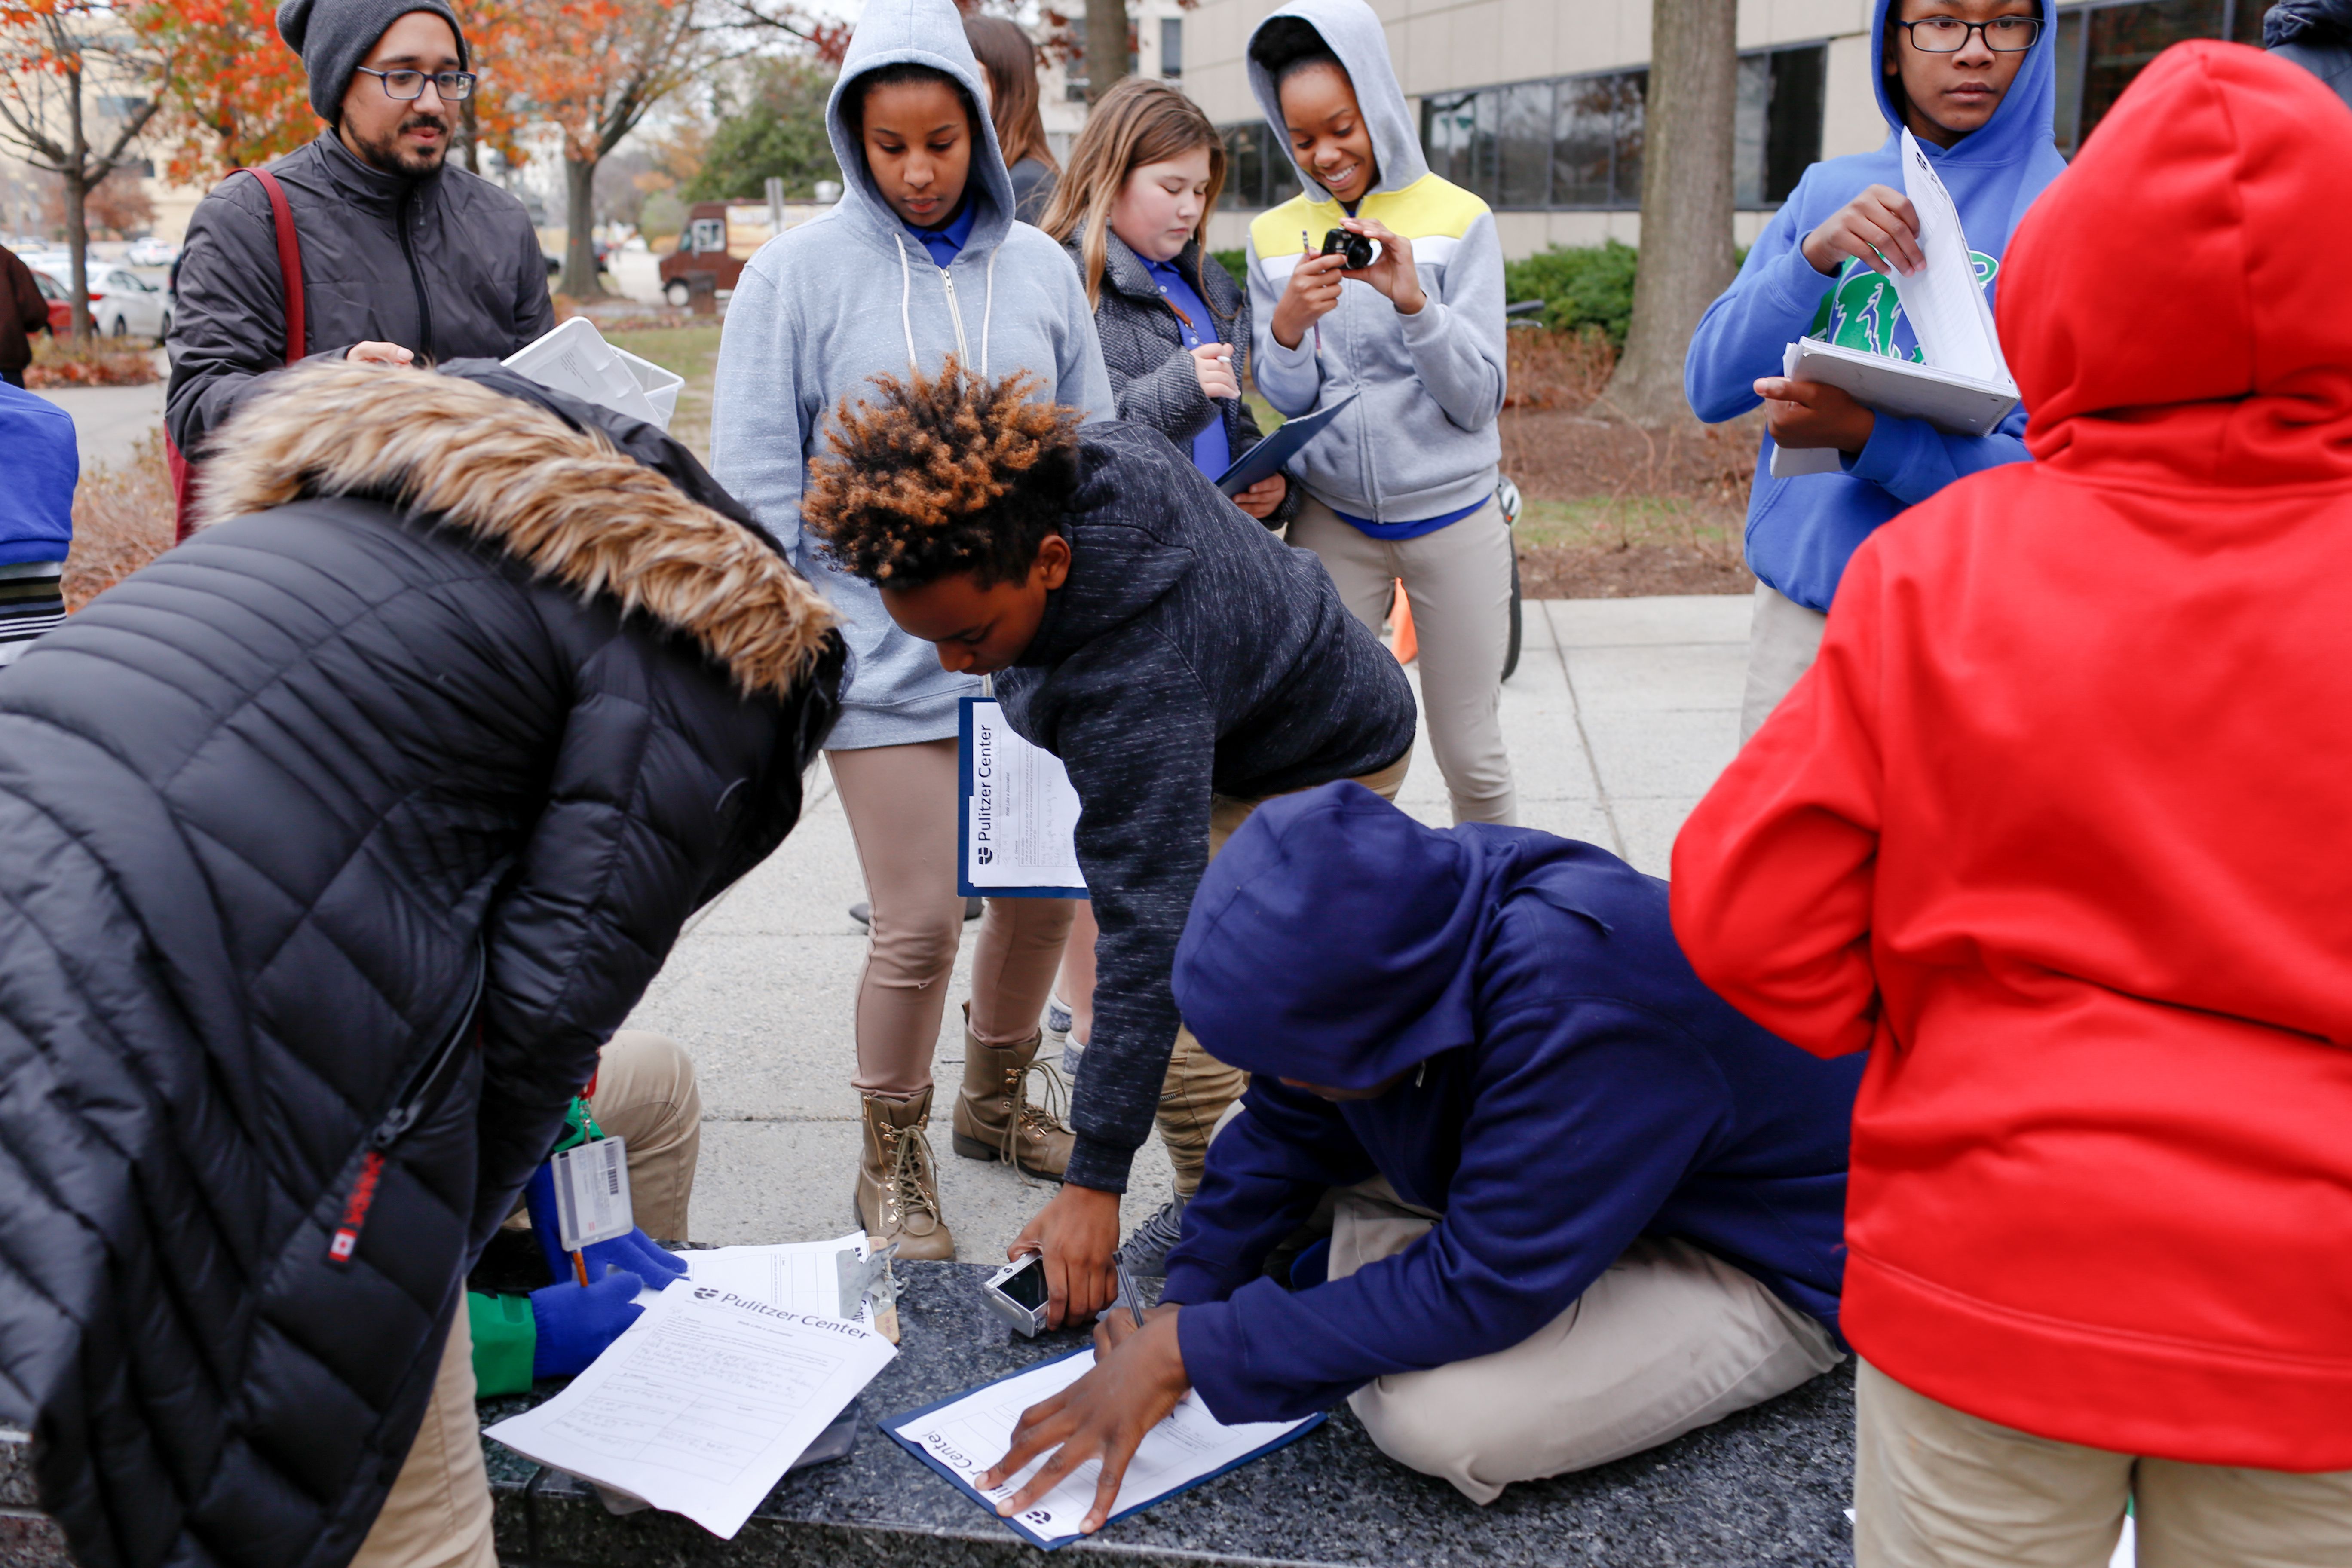 Students at Washington Global jot down observations about L'Enfant Plaza. Image by Eslah Attar. United States, 2017.